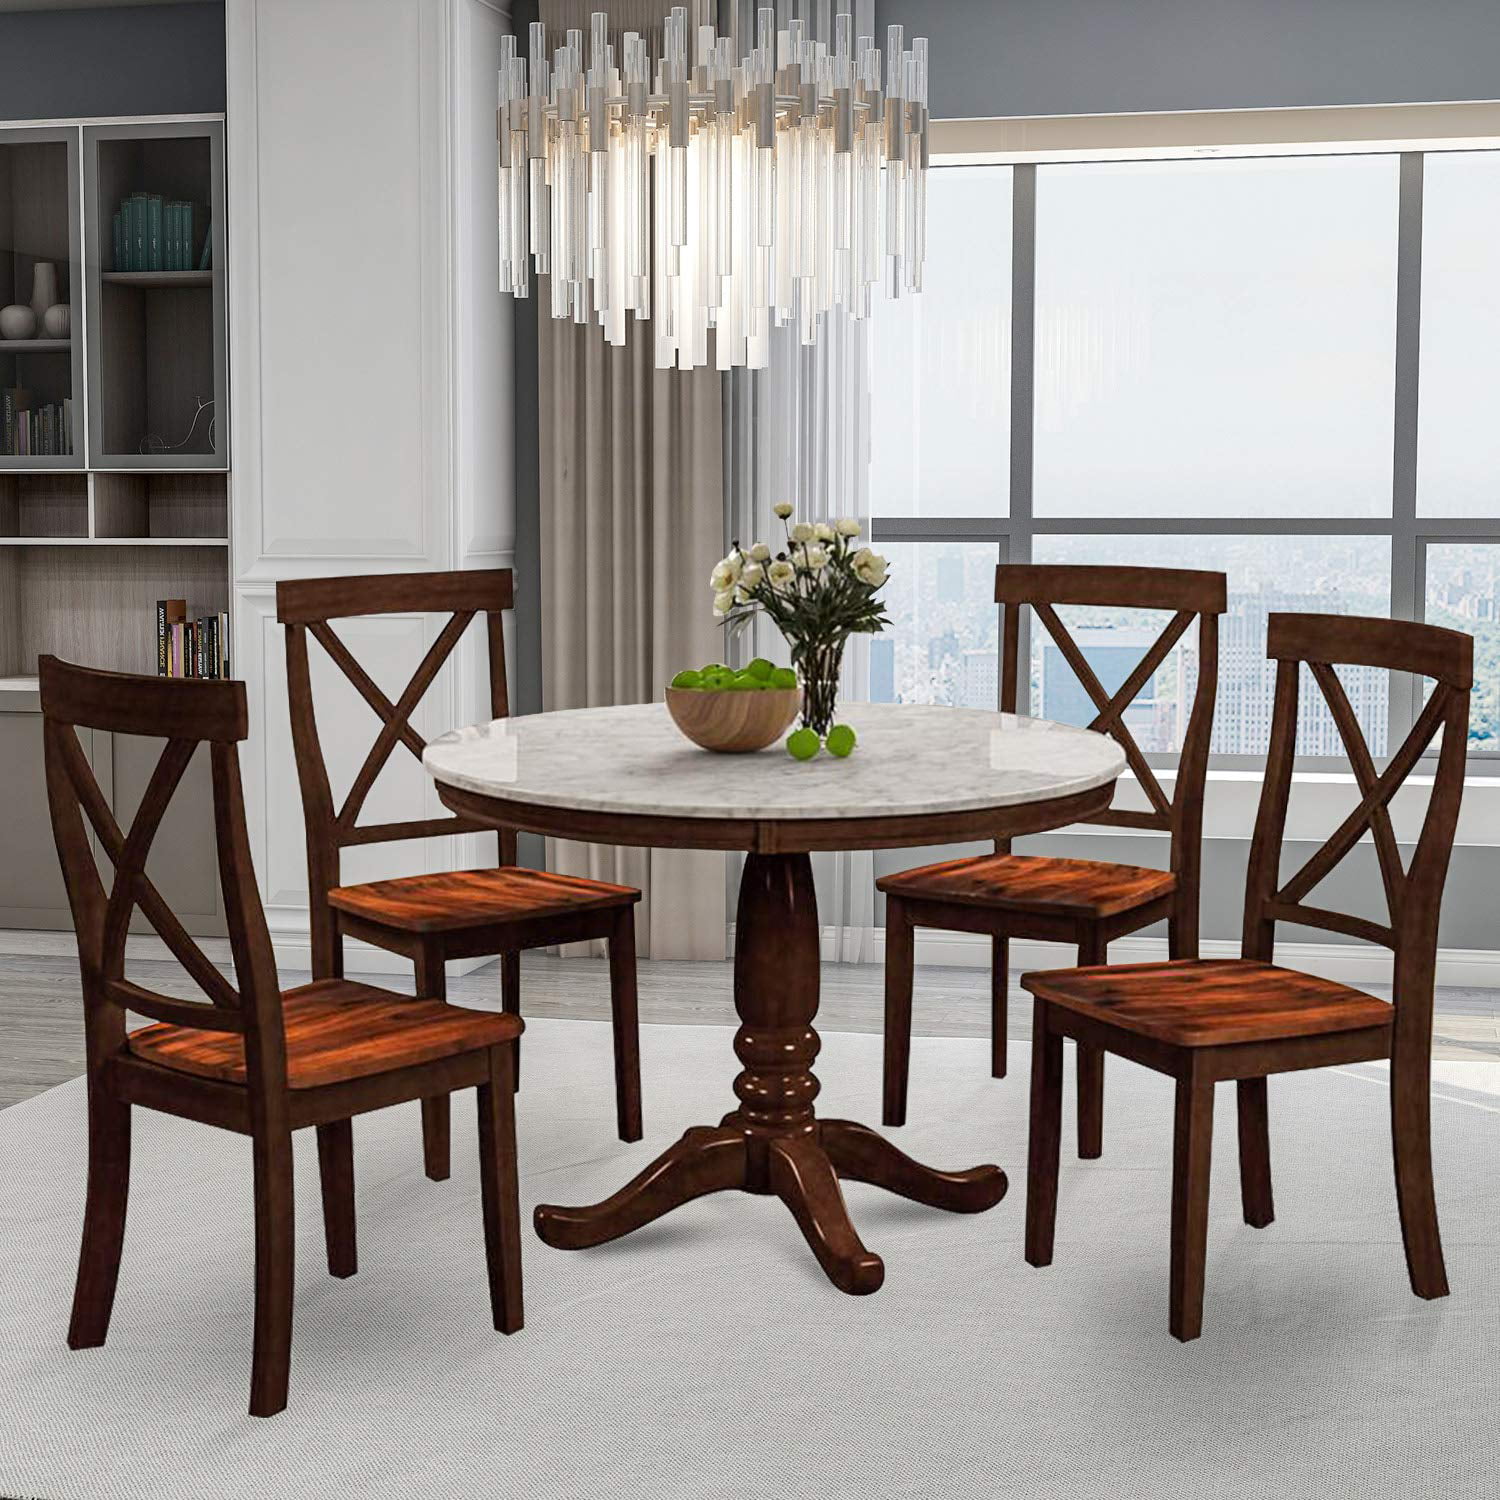 Dining Room Table And Chairs Set, Small Round Dining Table Set For 4